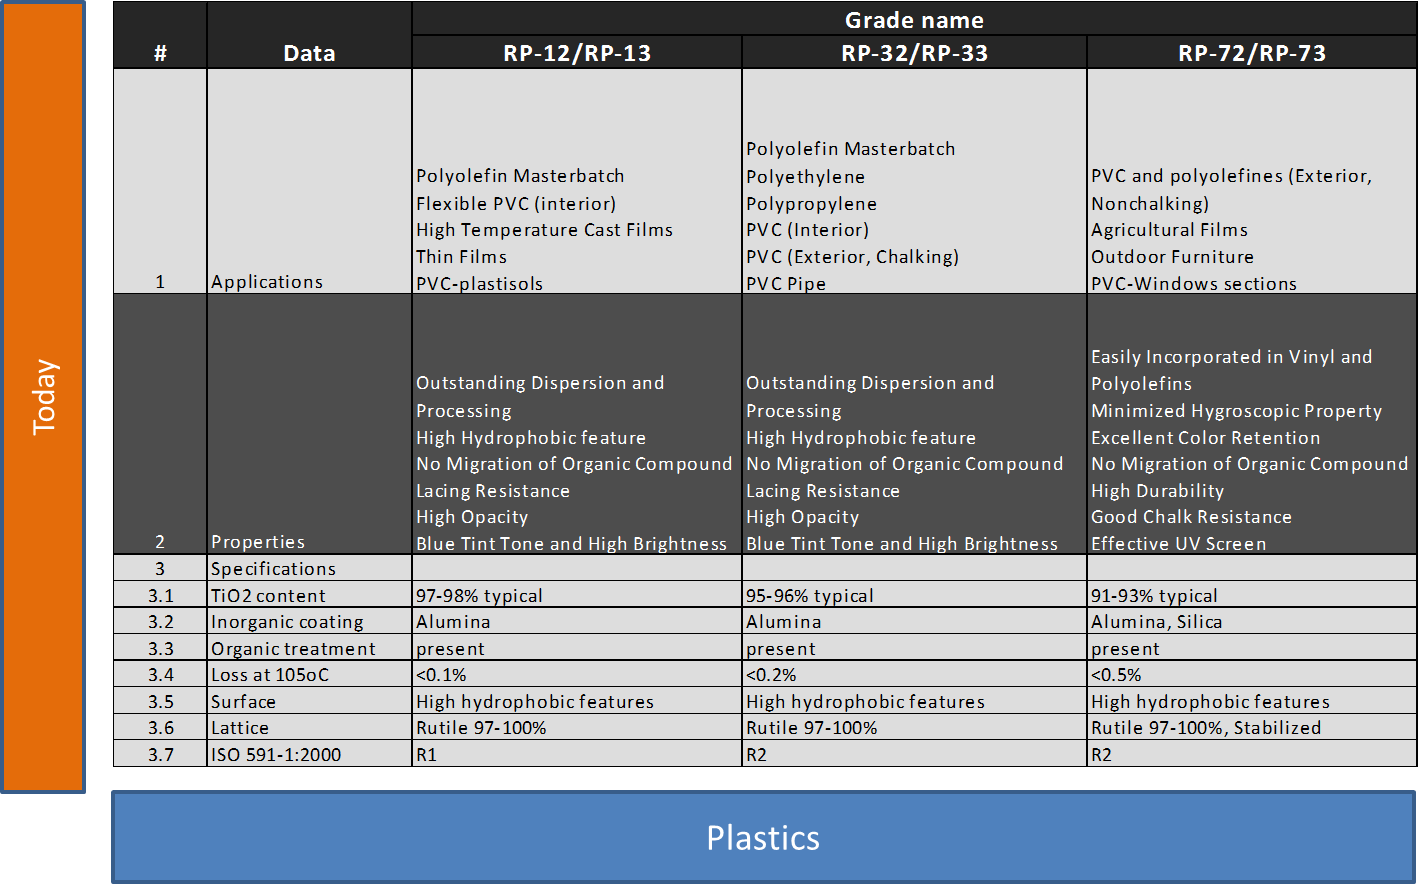 Characteristics of RP-32/RP-33 and RP-12/RP-13 and RP-72/RP-73